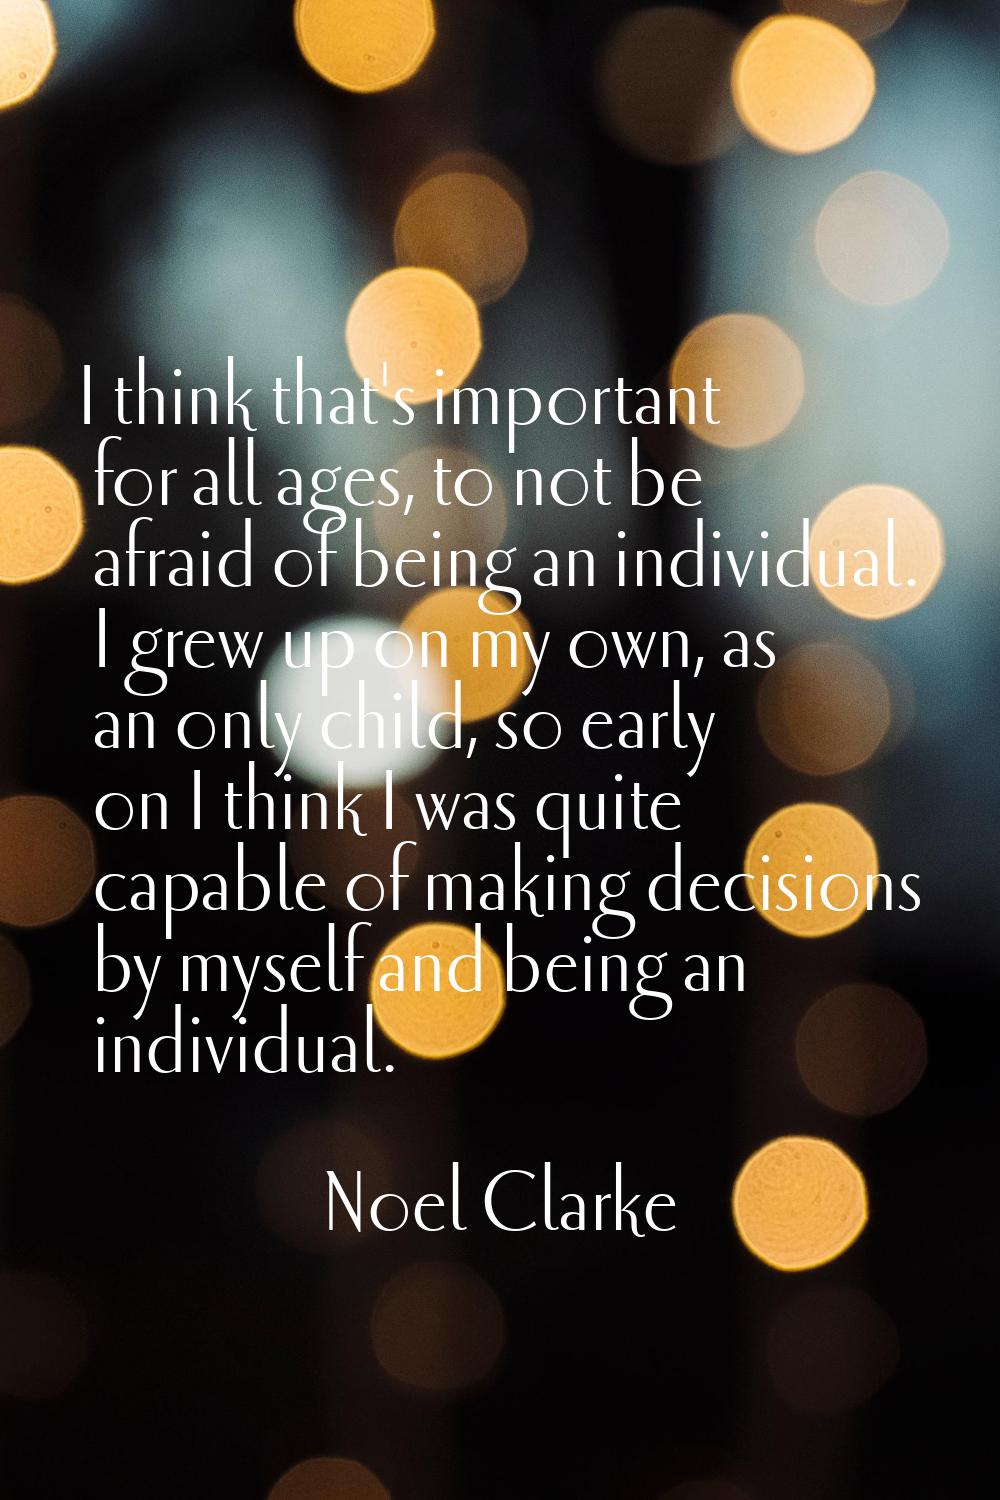 I think that's important for all ages, to not be afraid of being an individual. I grew up on my own